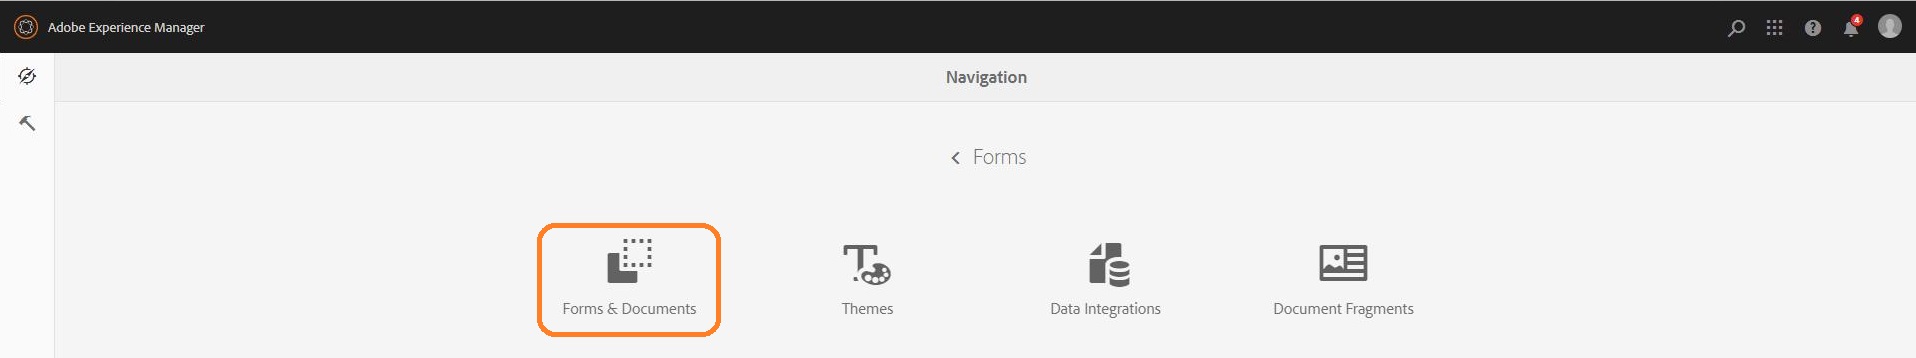 Navigation Forms and Documents